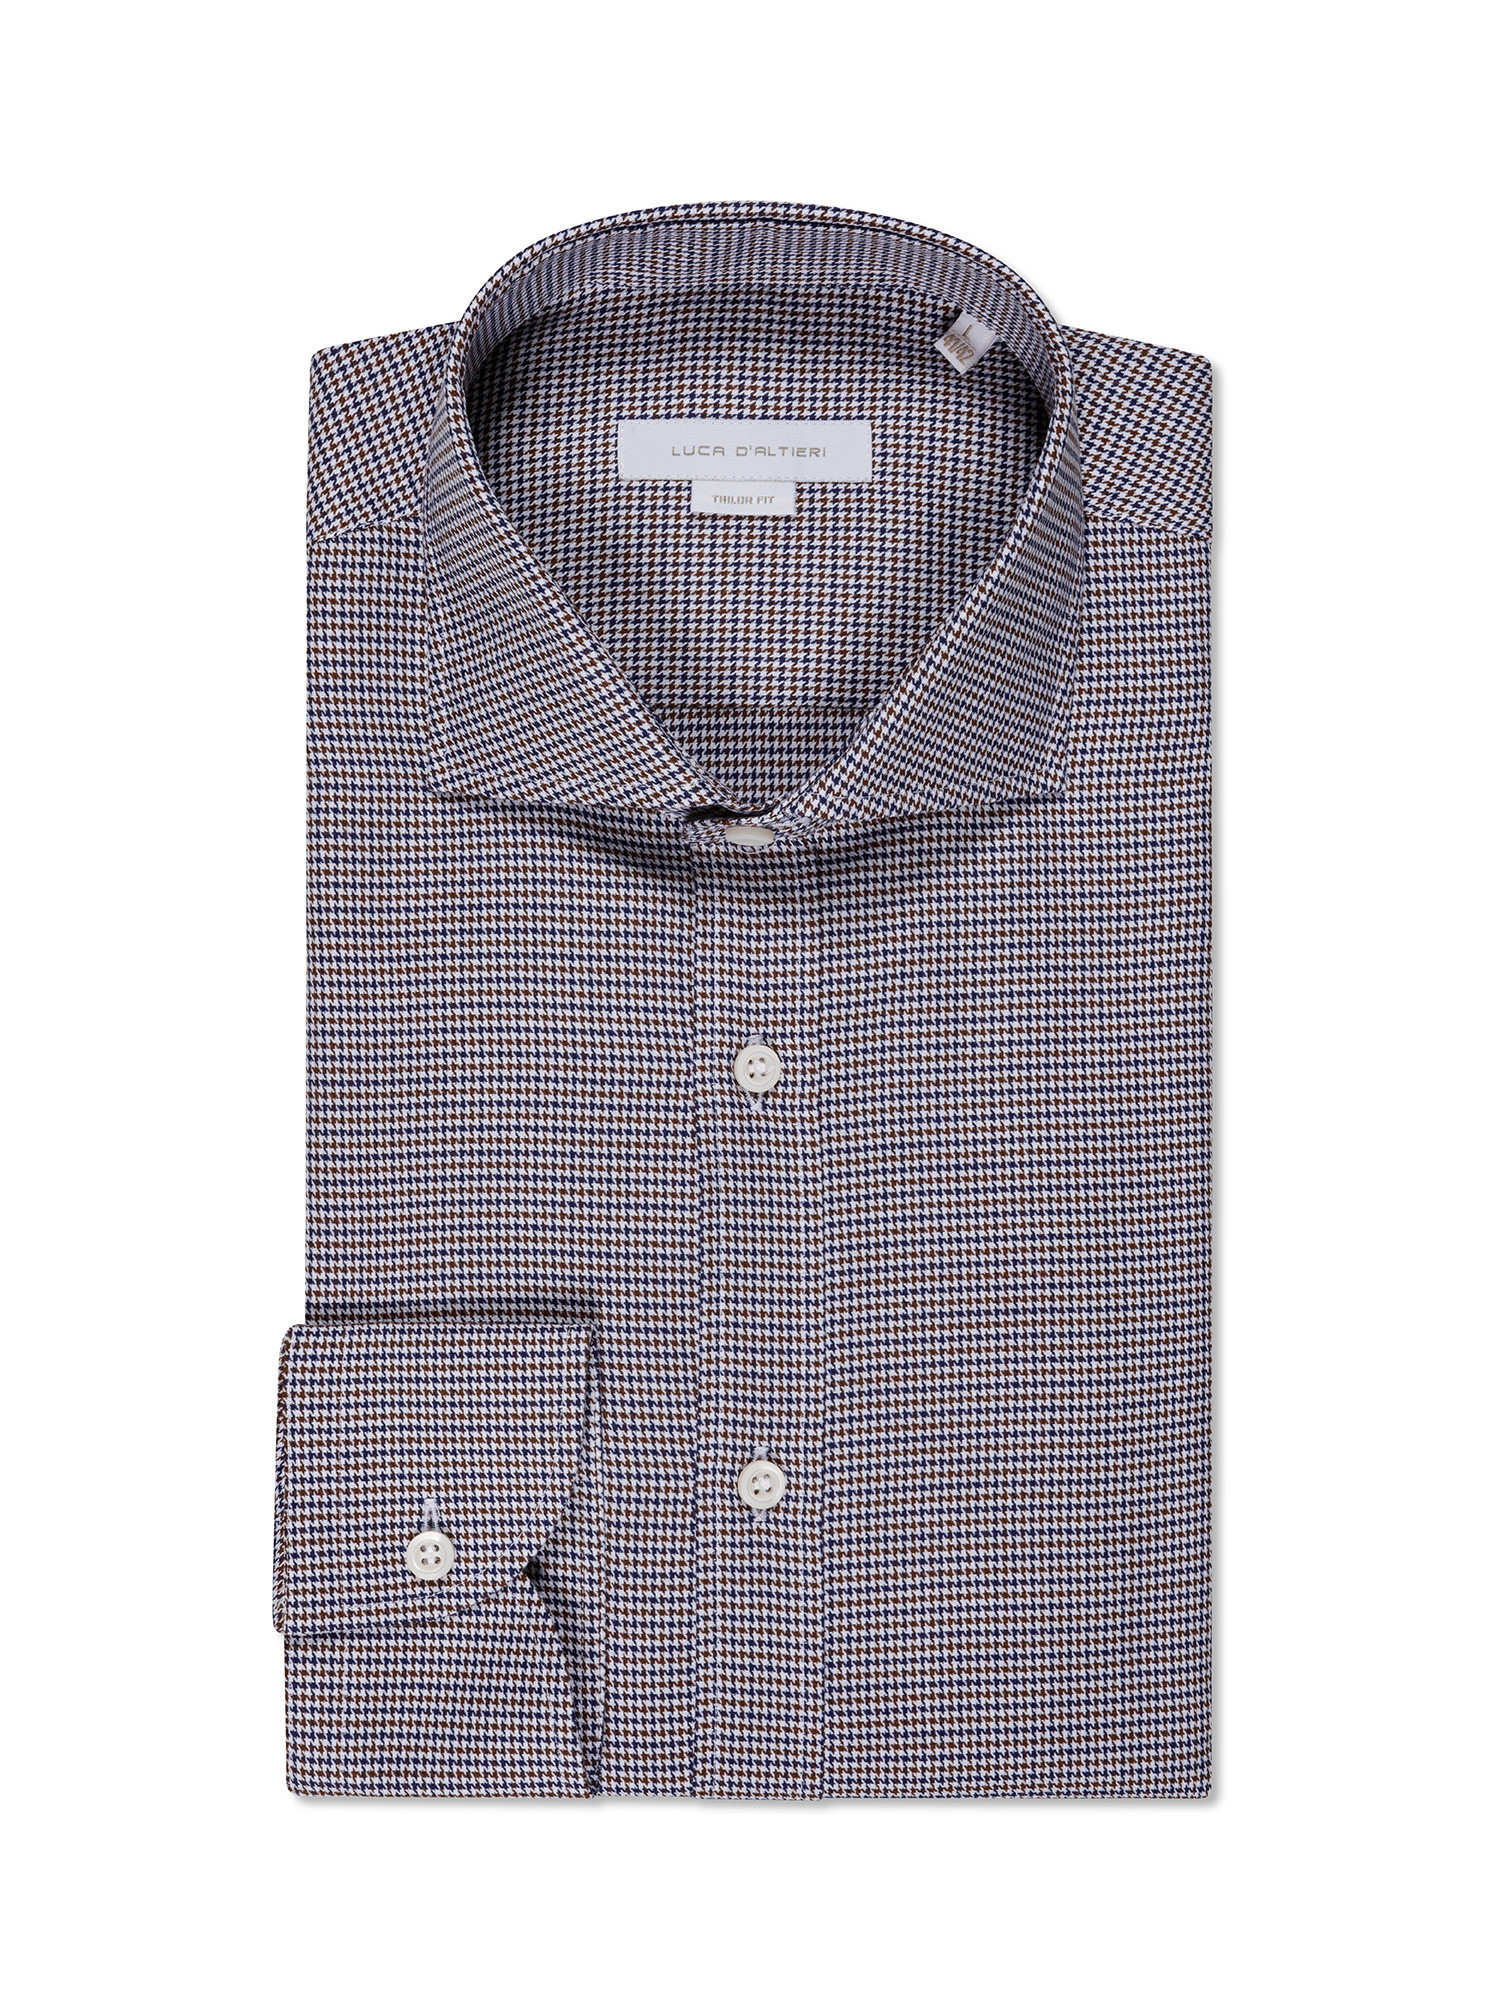 Luca D'Altieri - Tailor fit houndstooth shirt in pure cotton, Brown, large image number 0